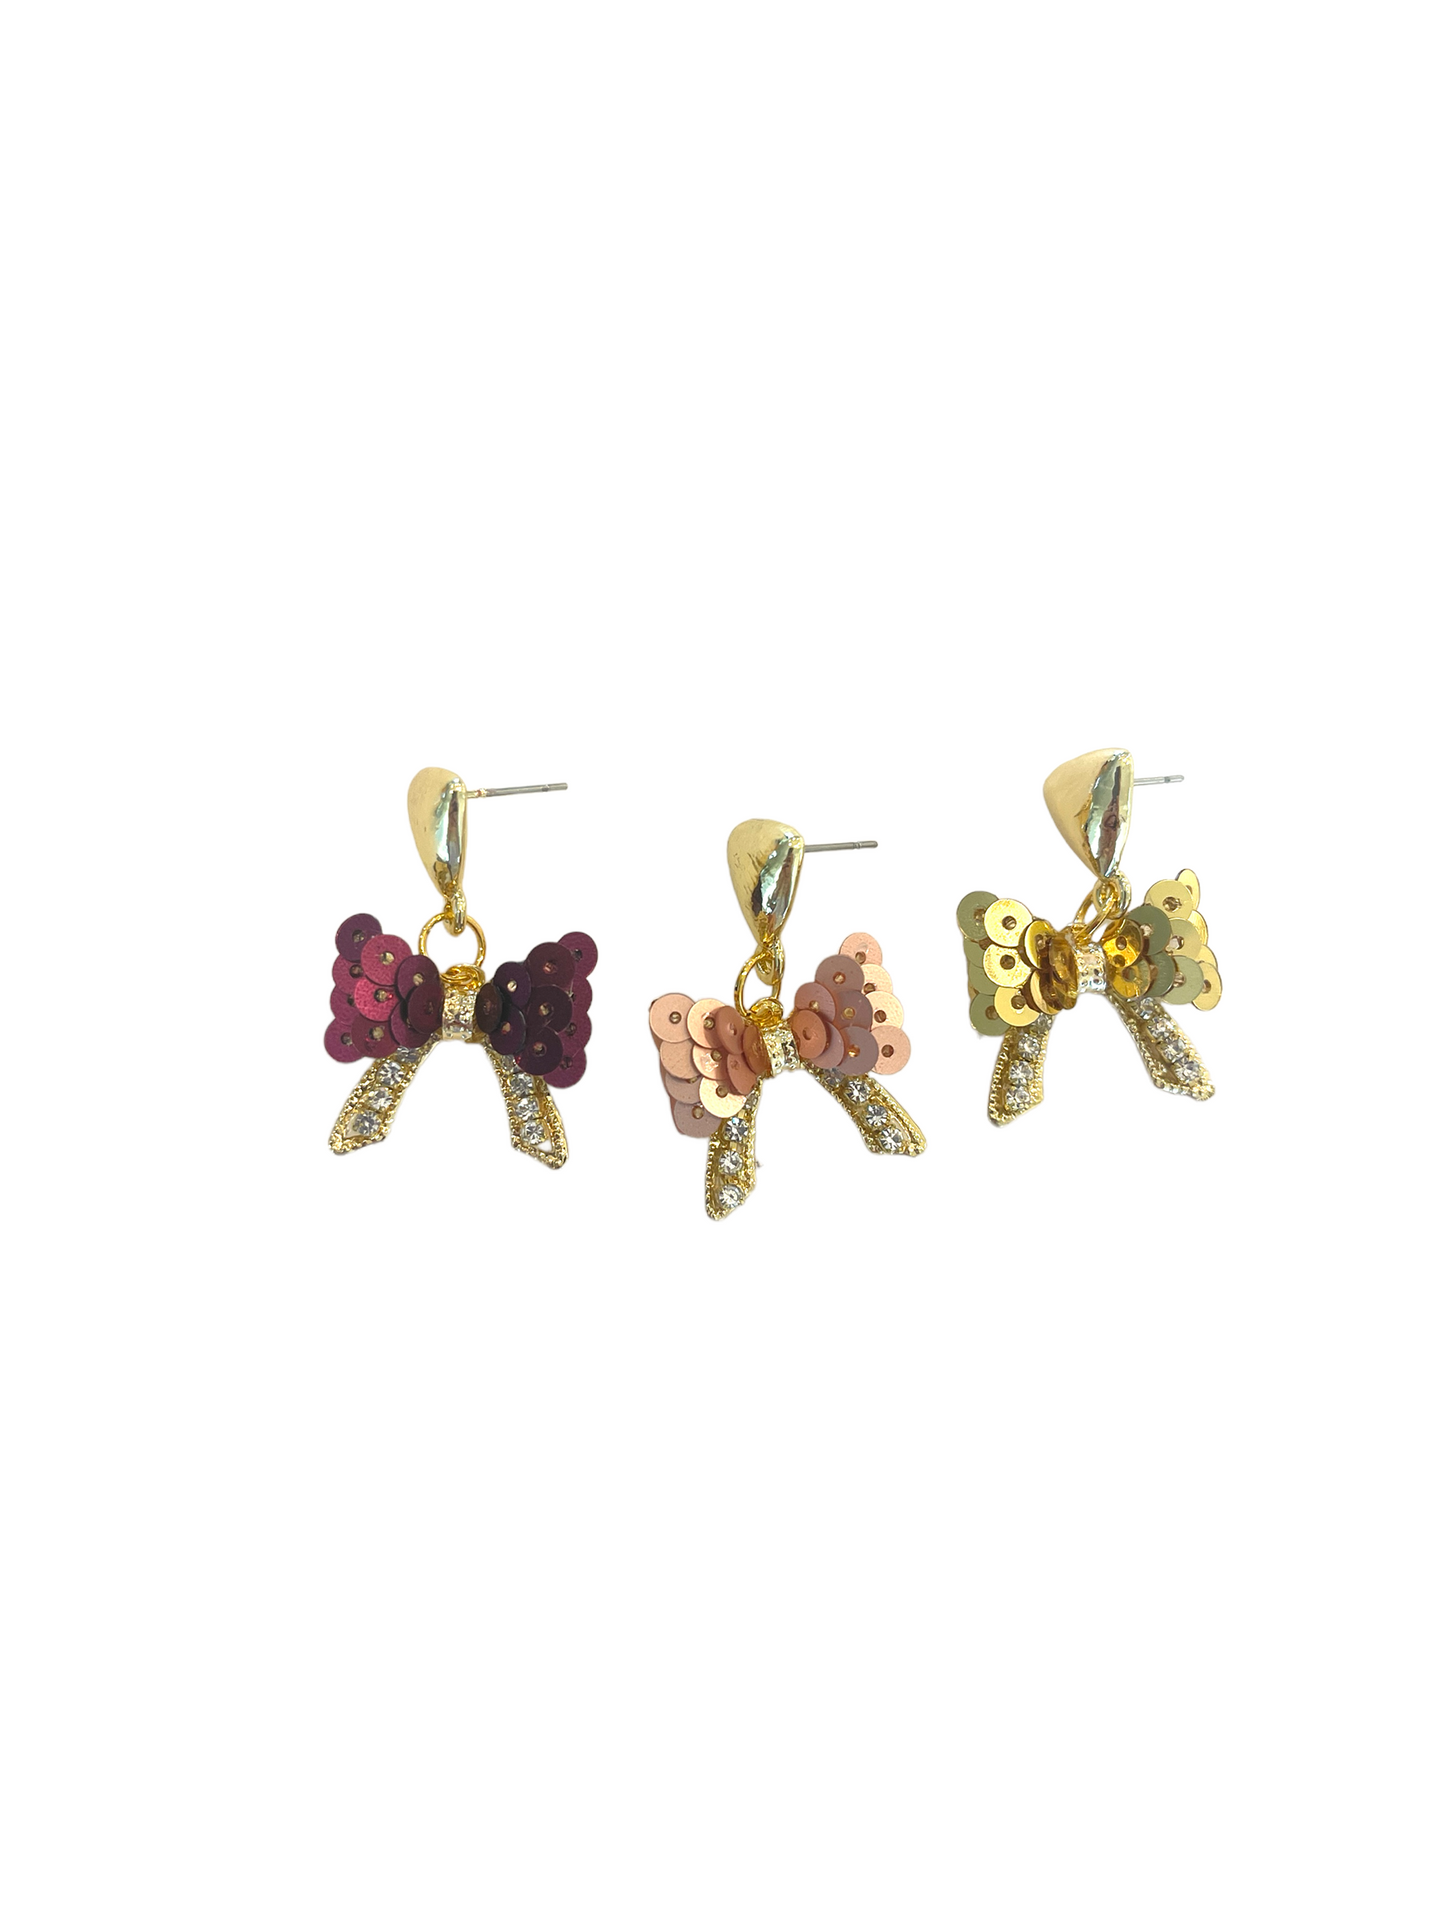 Sequin Bow Earrings - Small